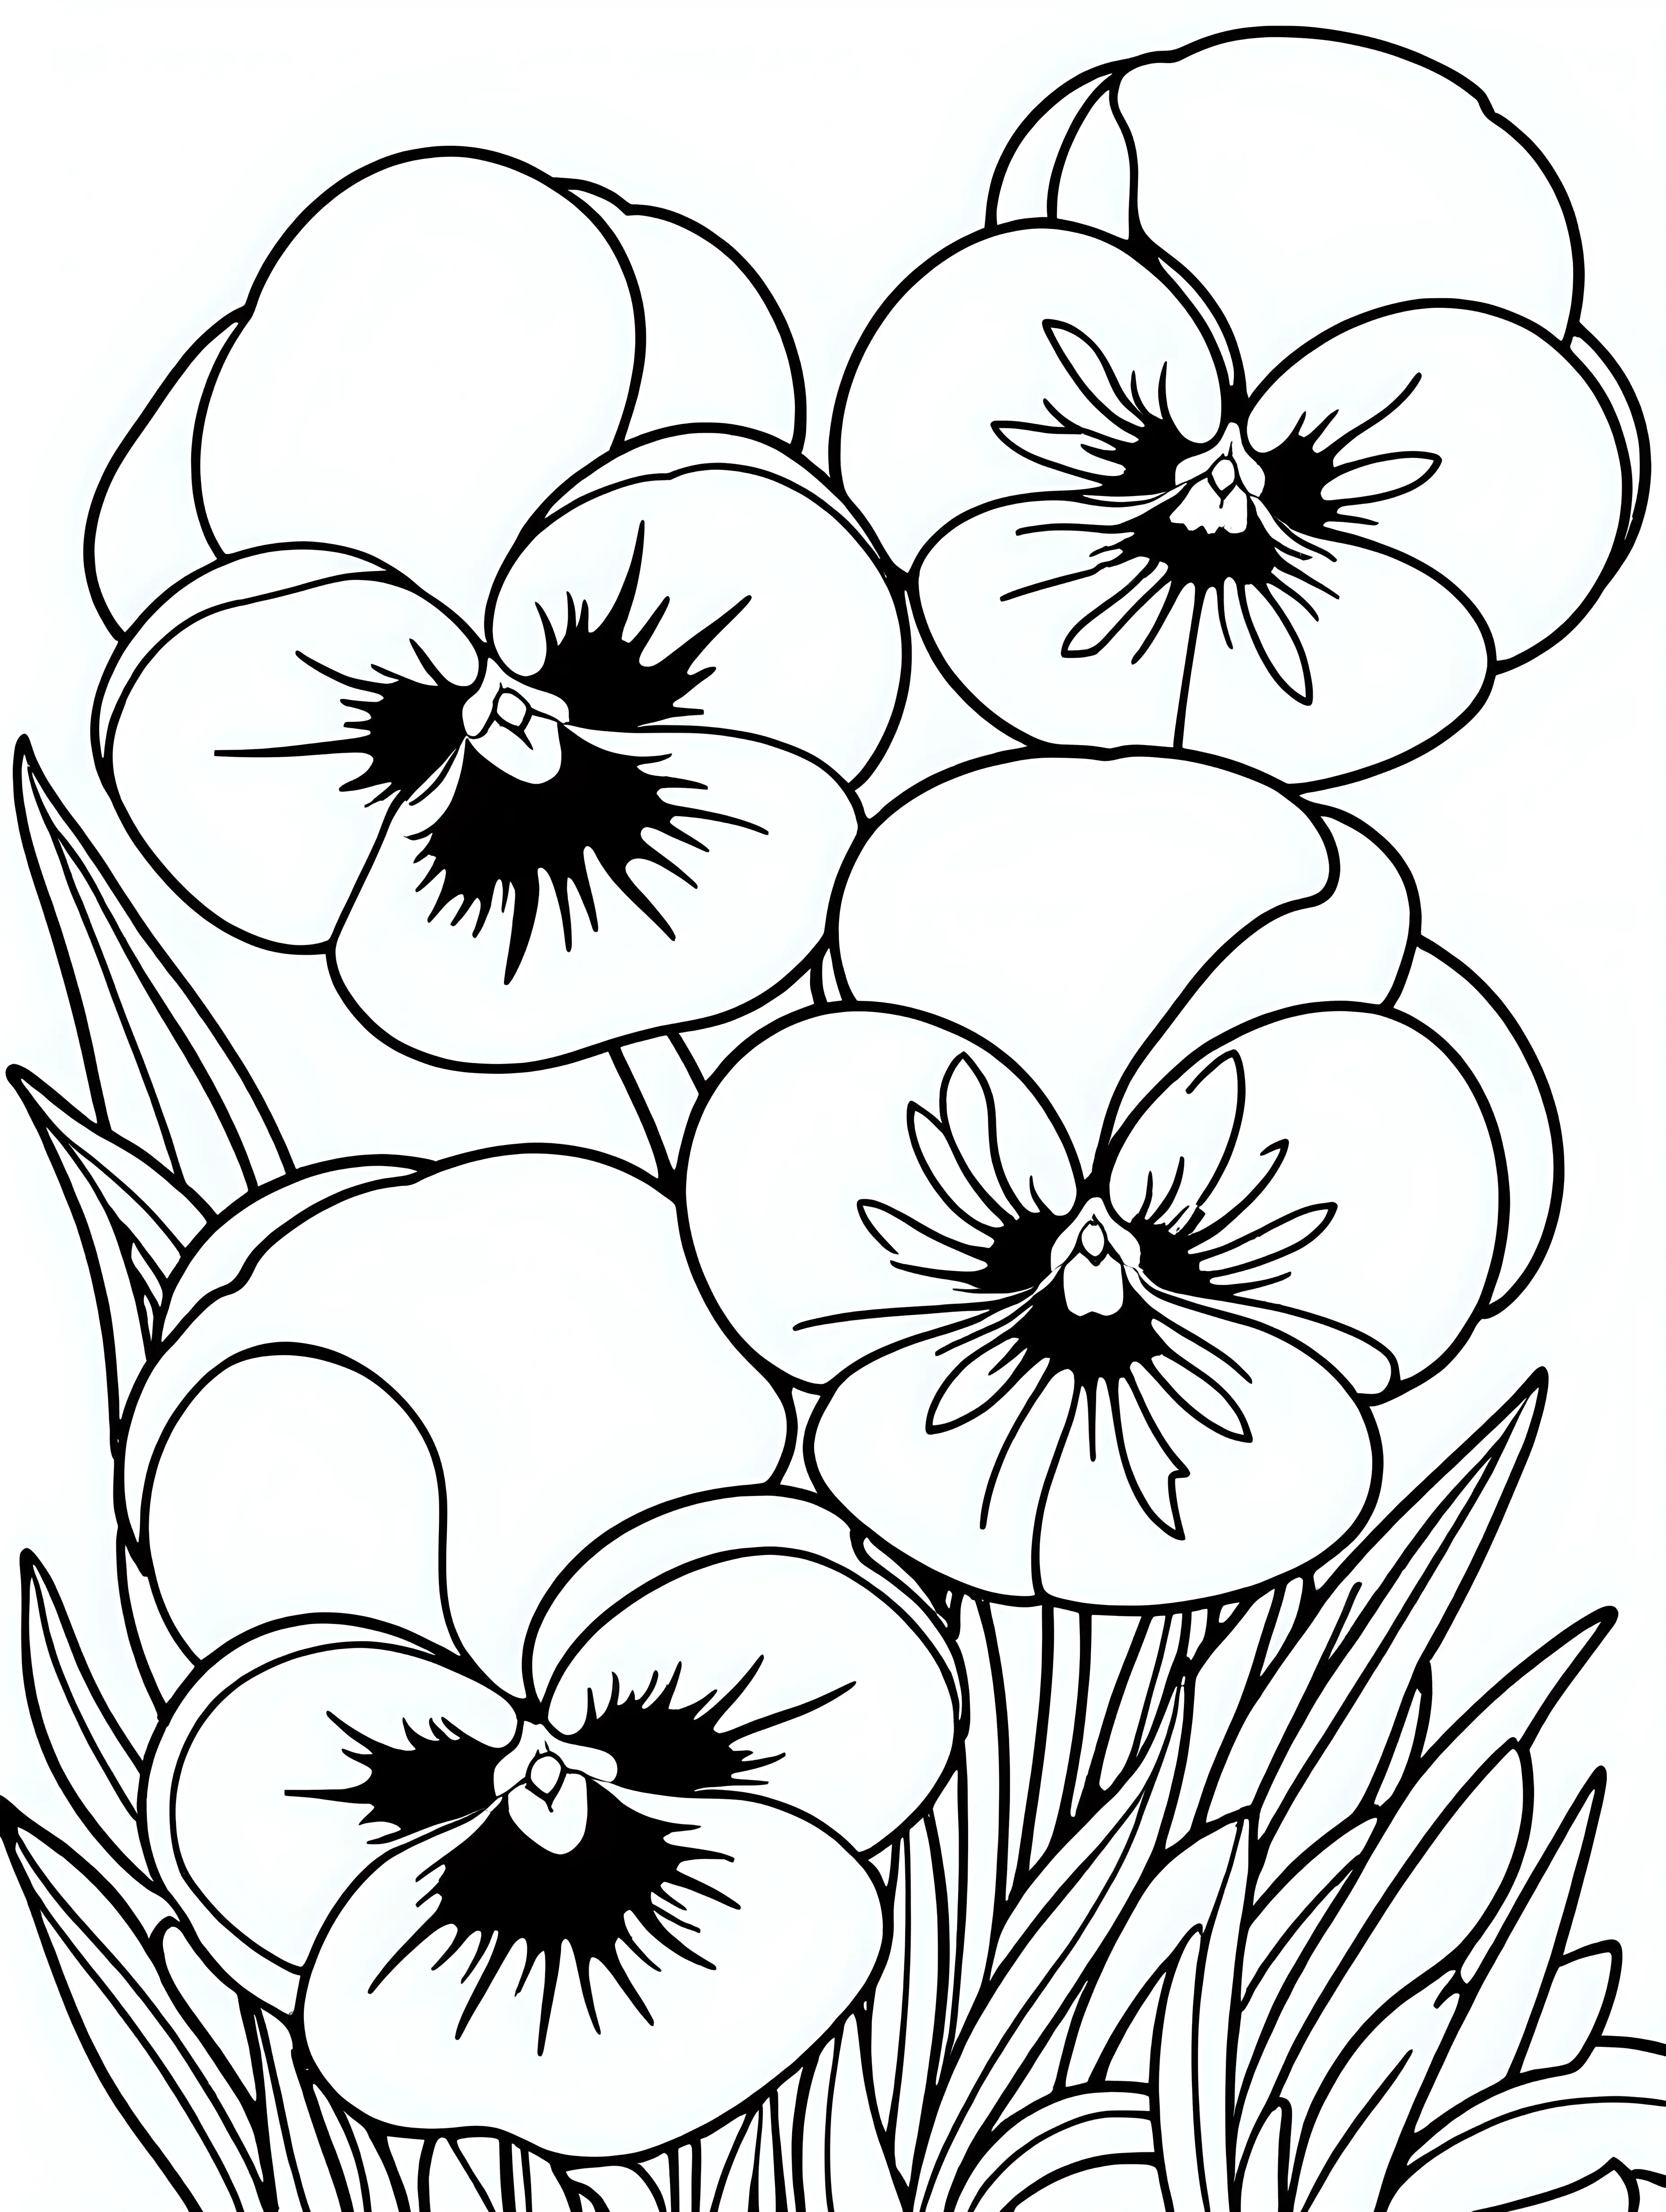 Cartoon Style Black and White Pansies Coloring Page